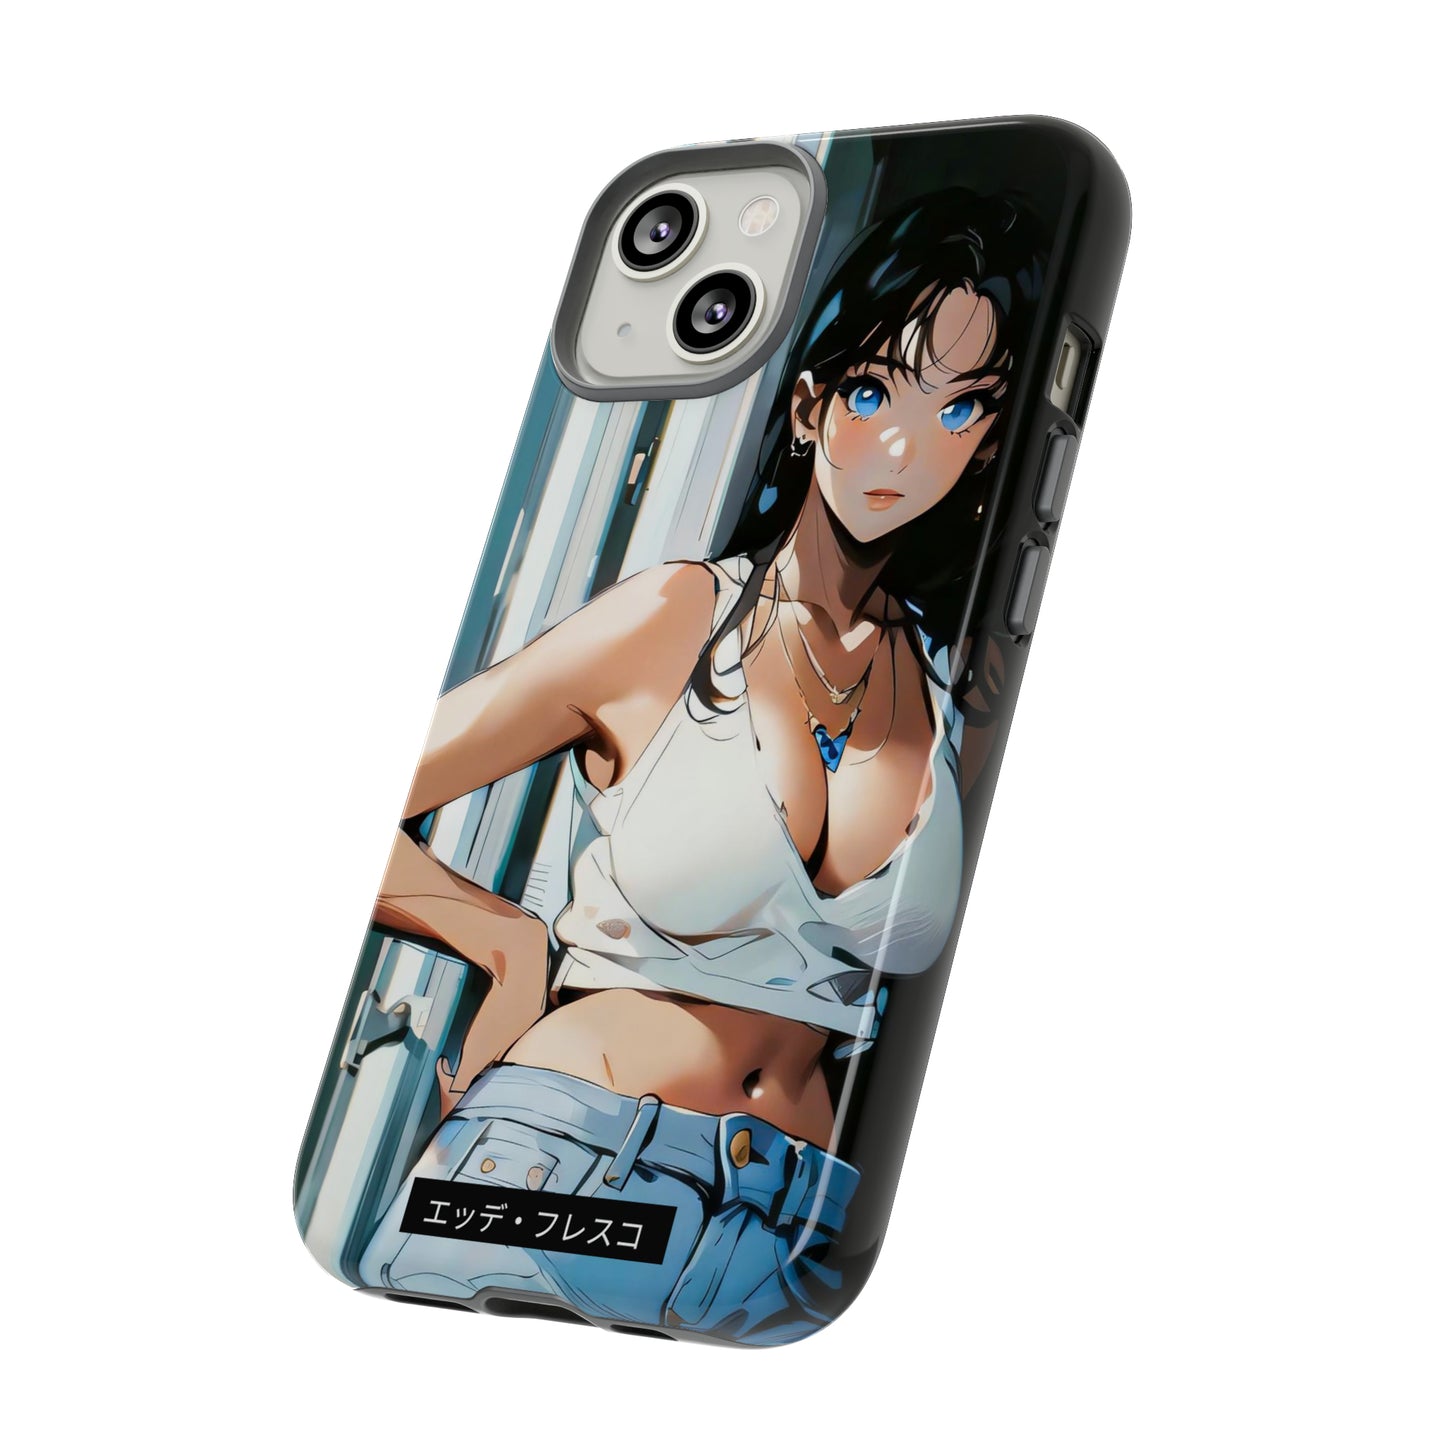 Anime Style Art Tough Cases- "She's Not Impressed"